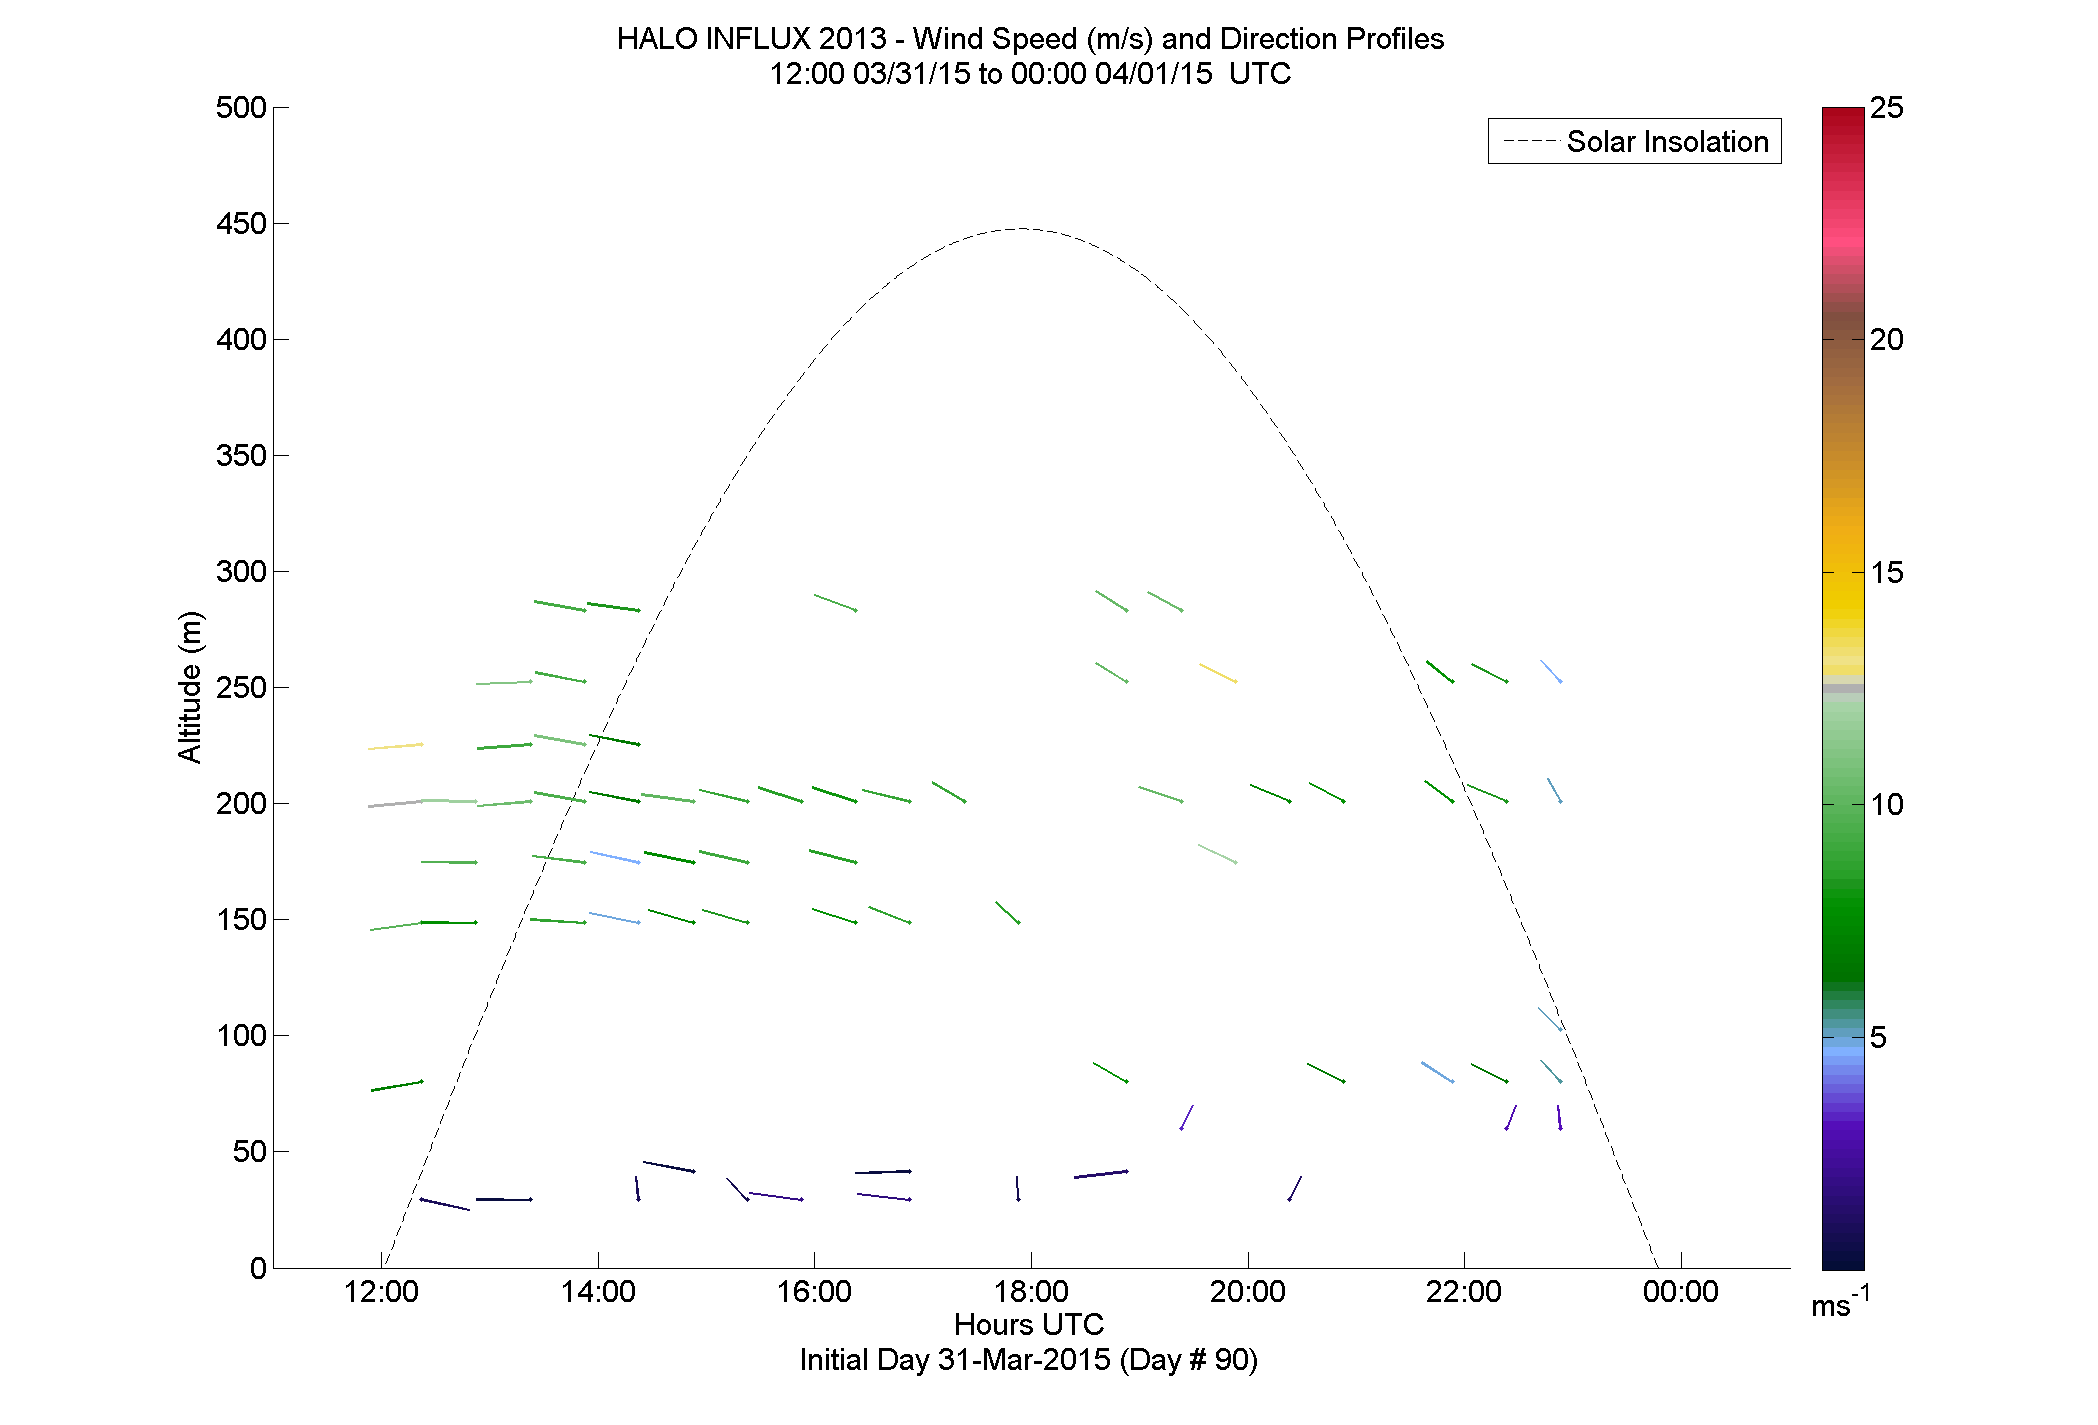 HALO speed and direction profile - March 31 pm